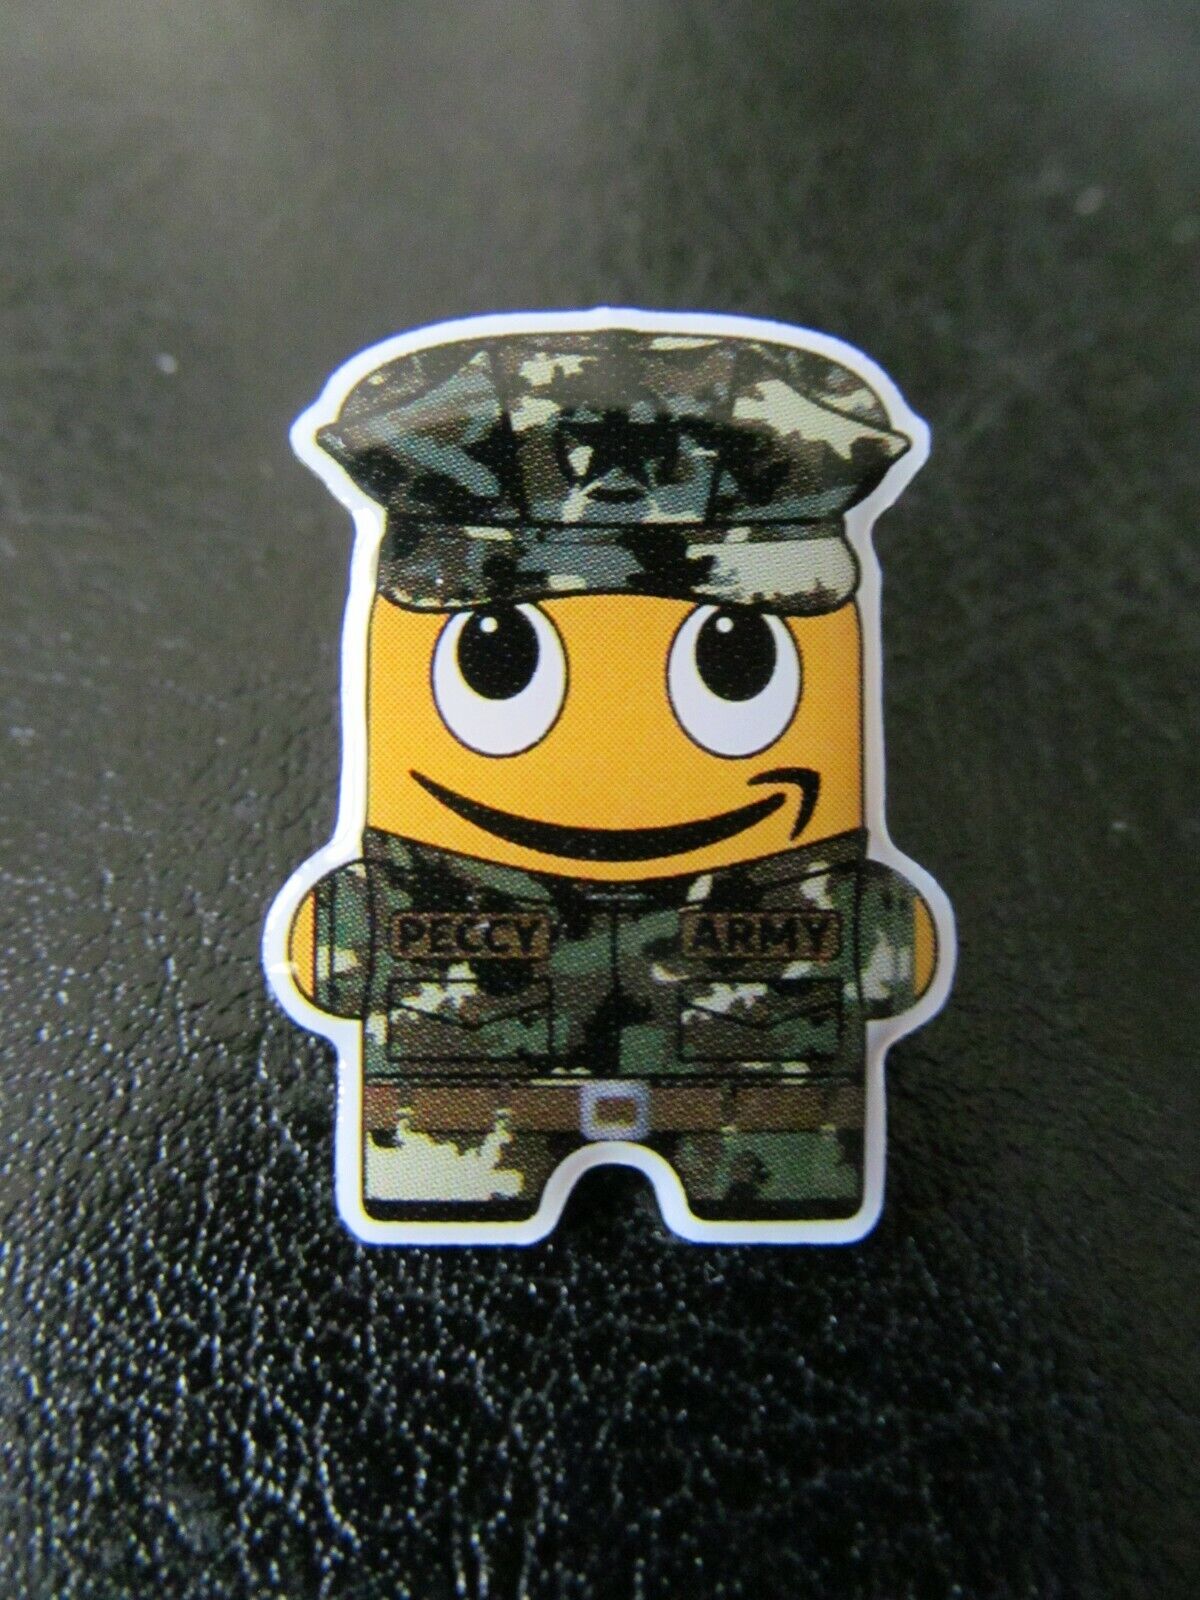 Amazon Peccy Employee Pin Army Armed Forces Veterans Collectible 